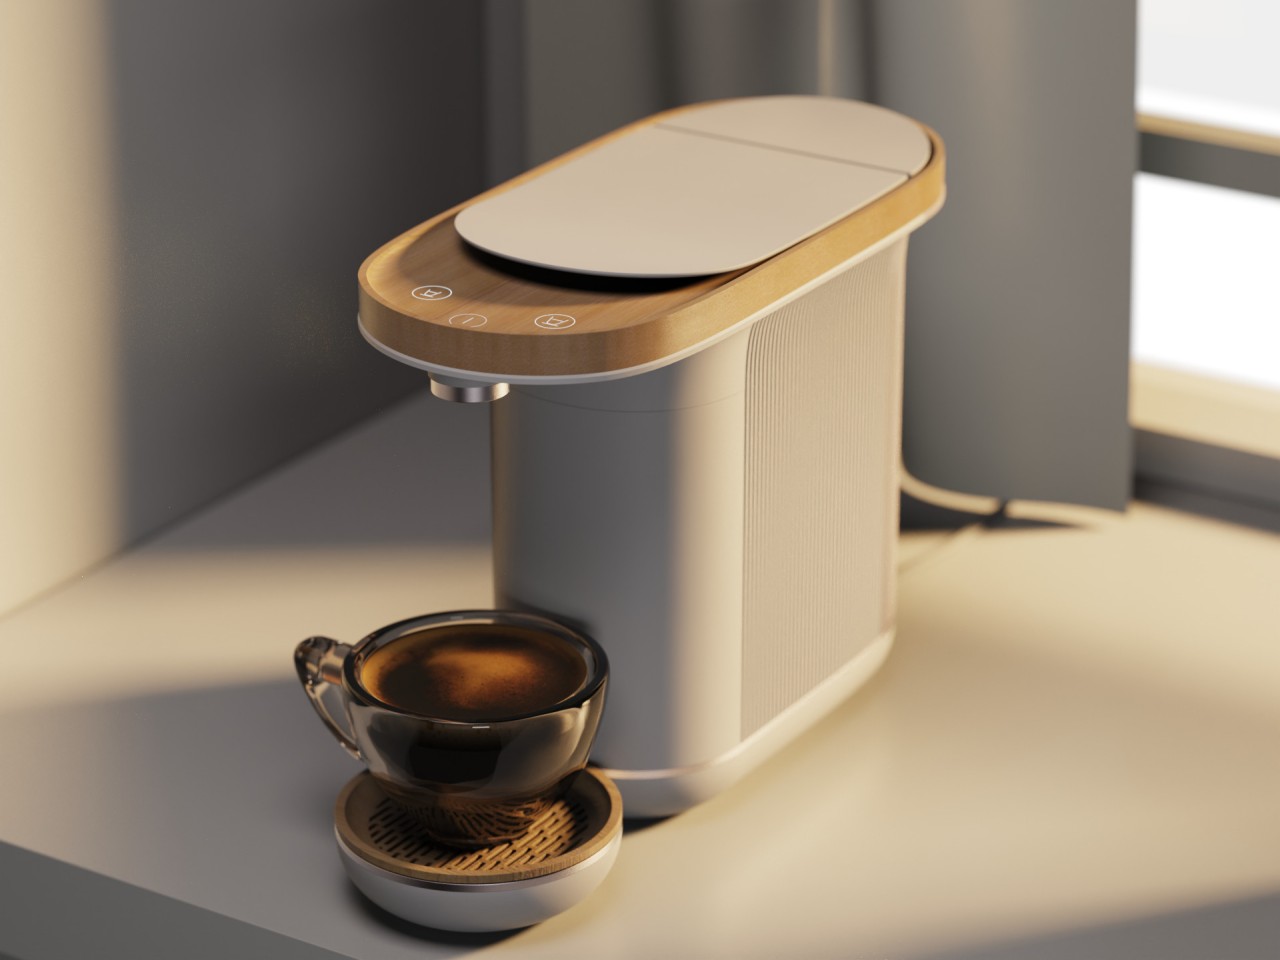 https://www.yankodesign.com/images/design_news/2023/04/capsule-coffee-machine-concept-adds-a-sense-of-warmth-to-your-daily-brew/wolly-coffe-machine-concept-15.jpg